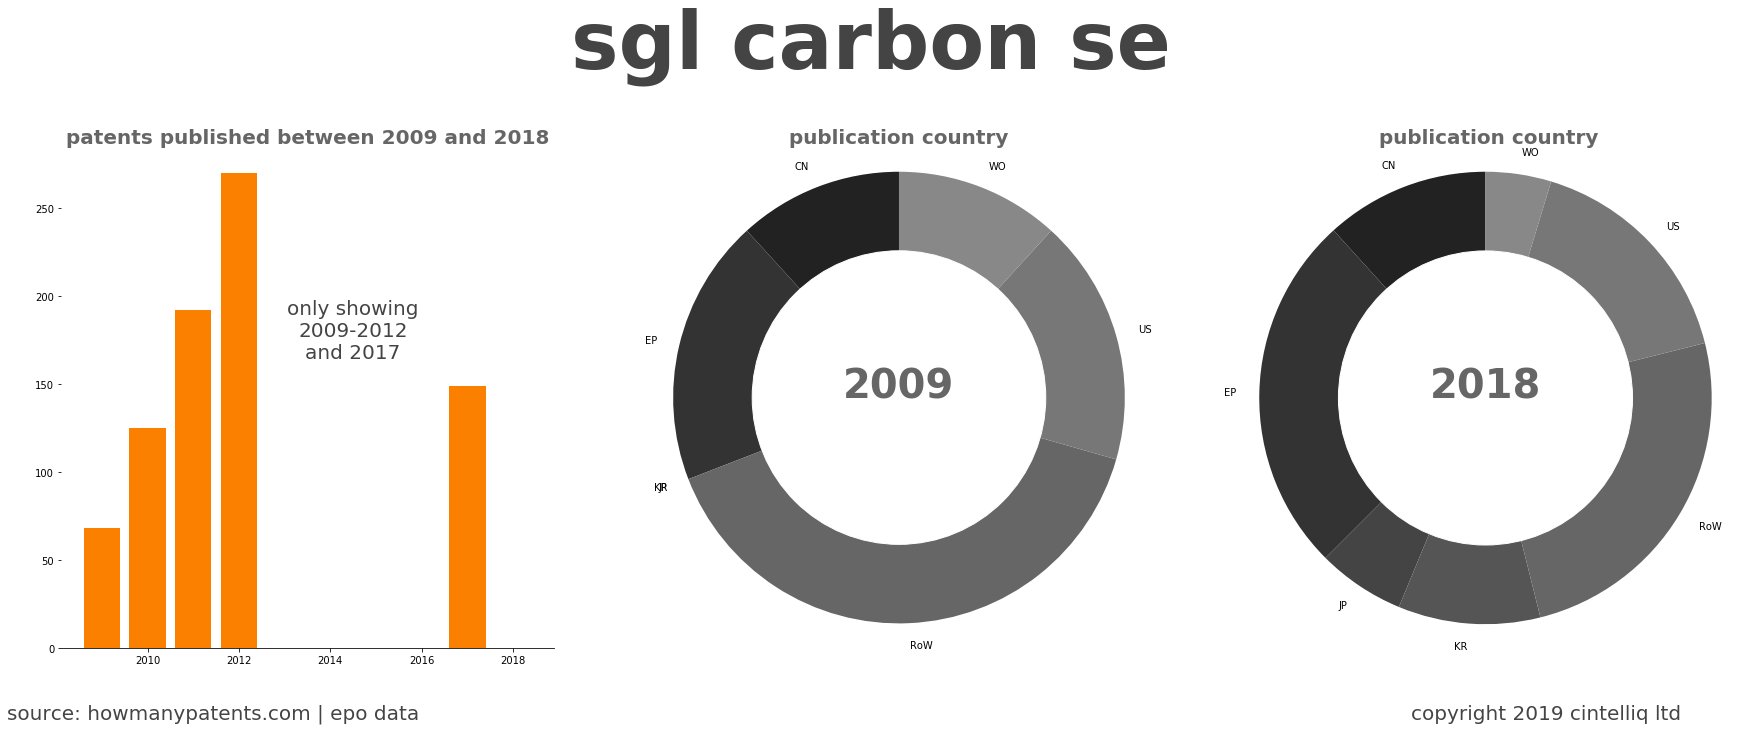 summary of patents for Sgl Carbon Se